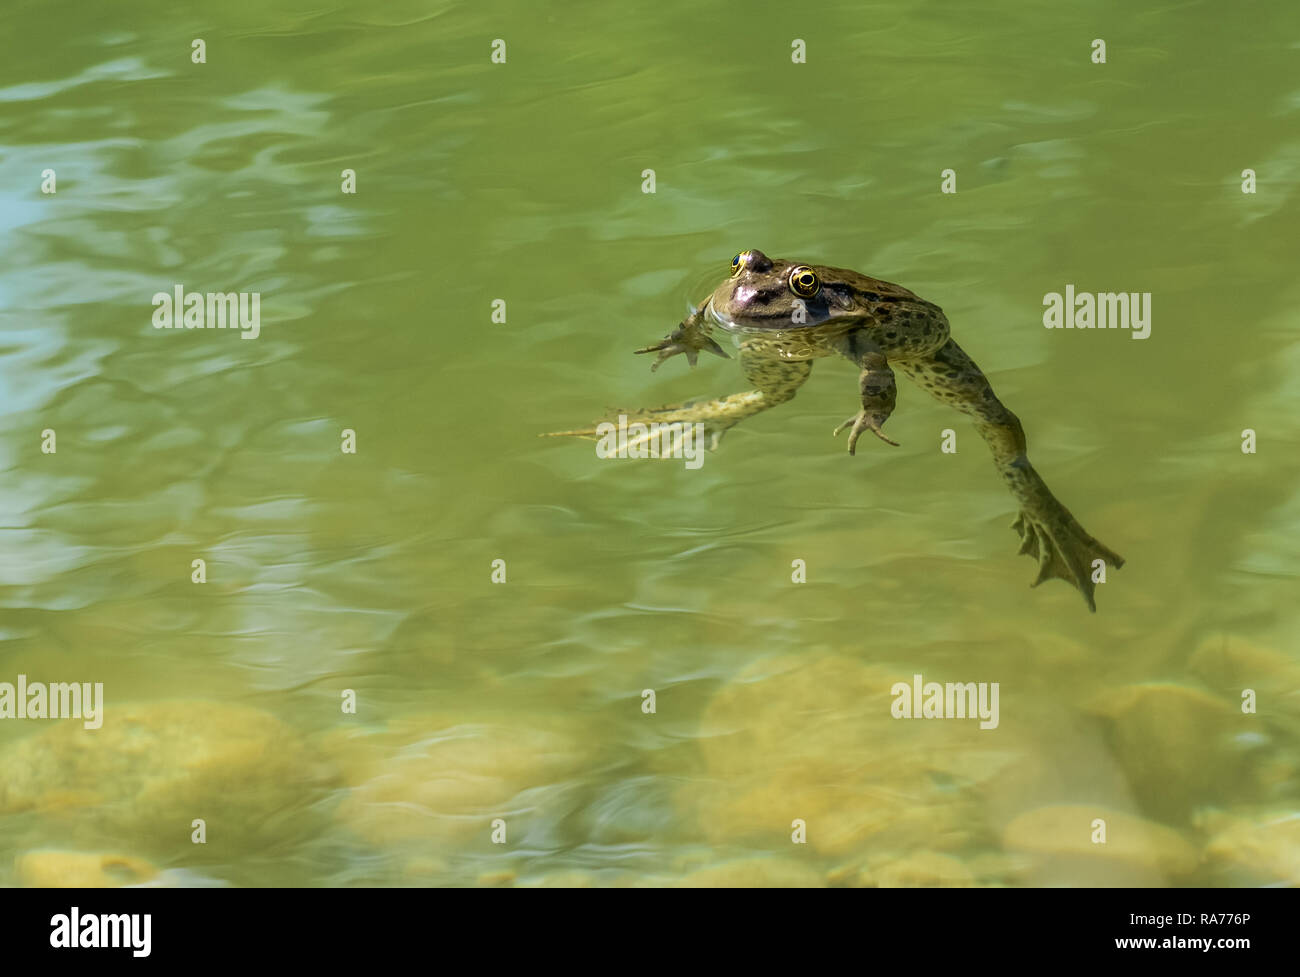 Green frog with large webbed feet Stock Photo